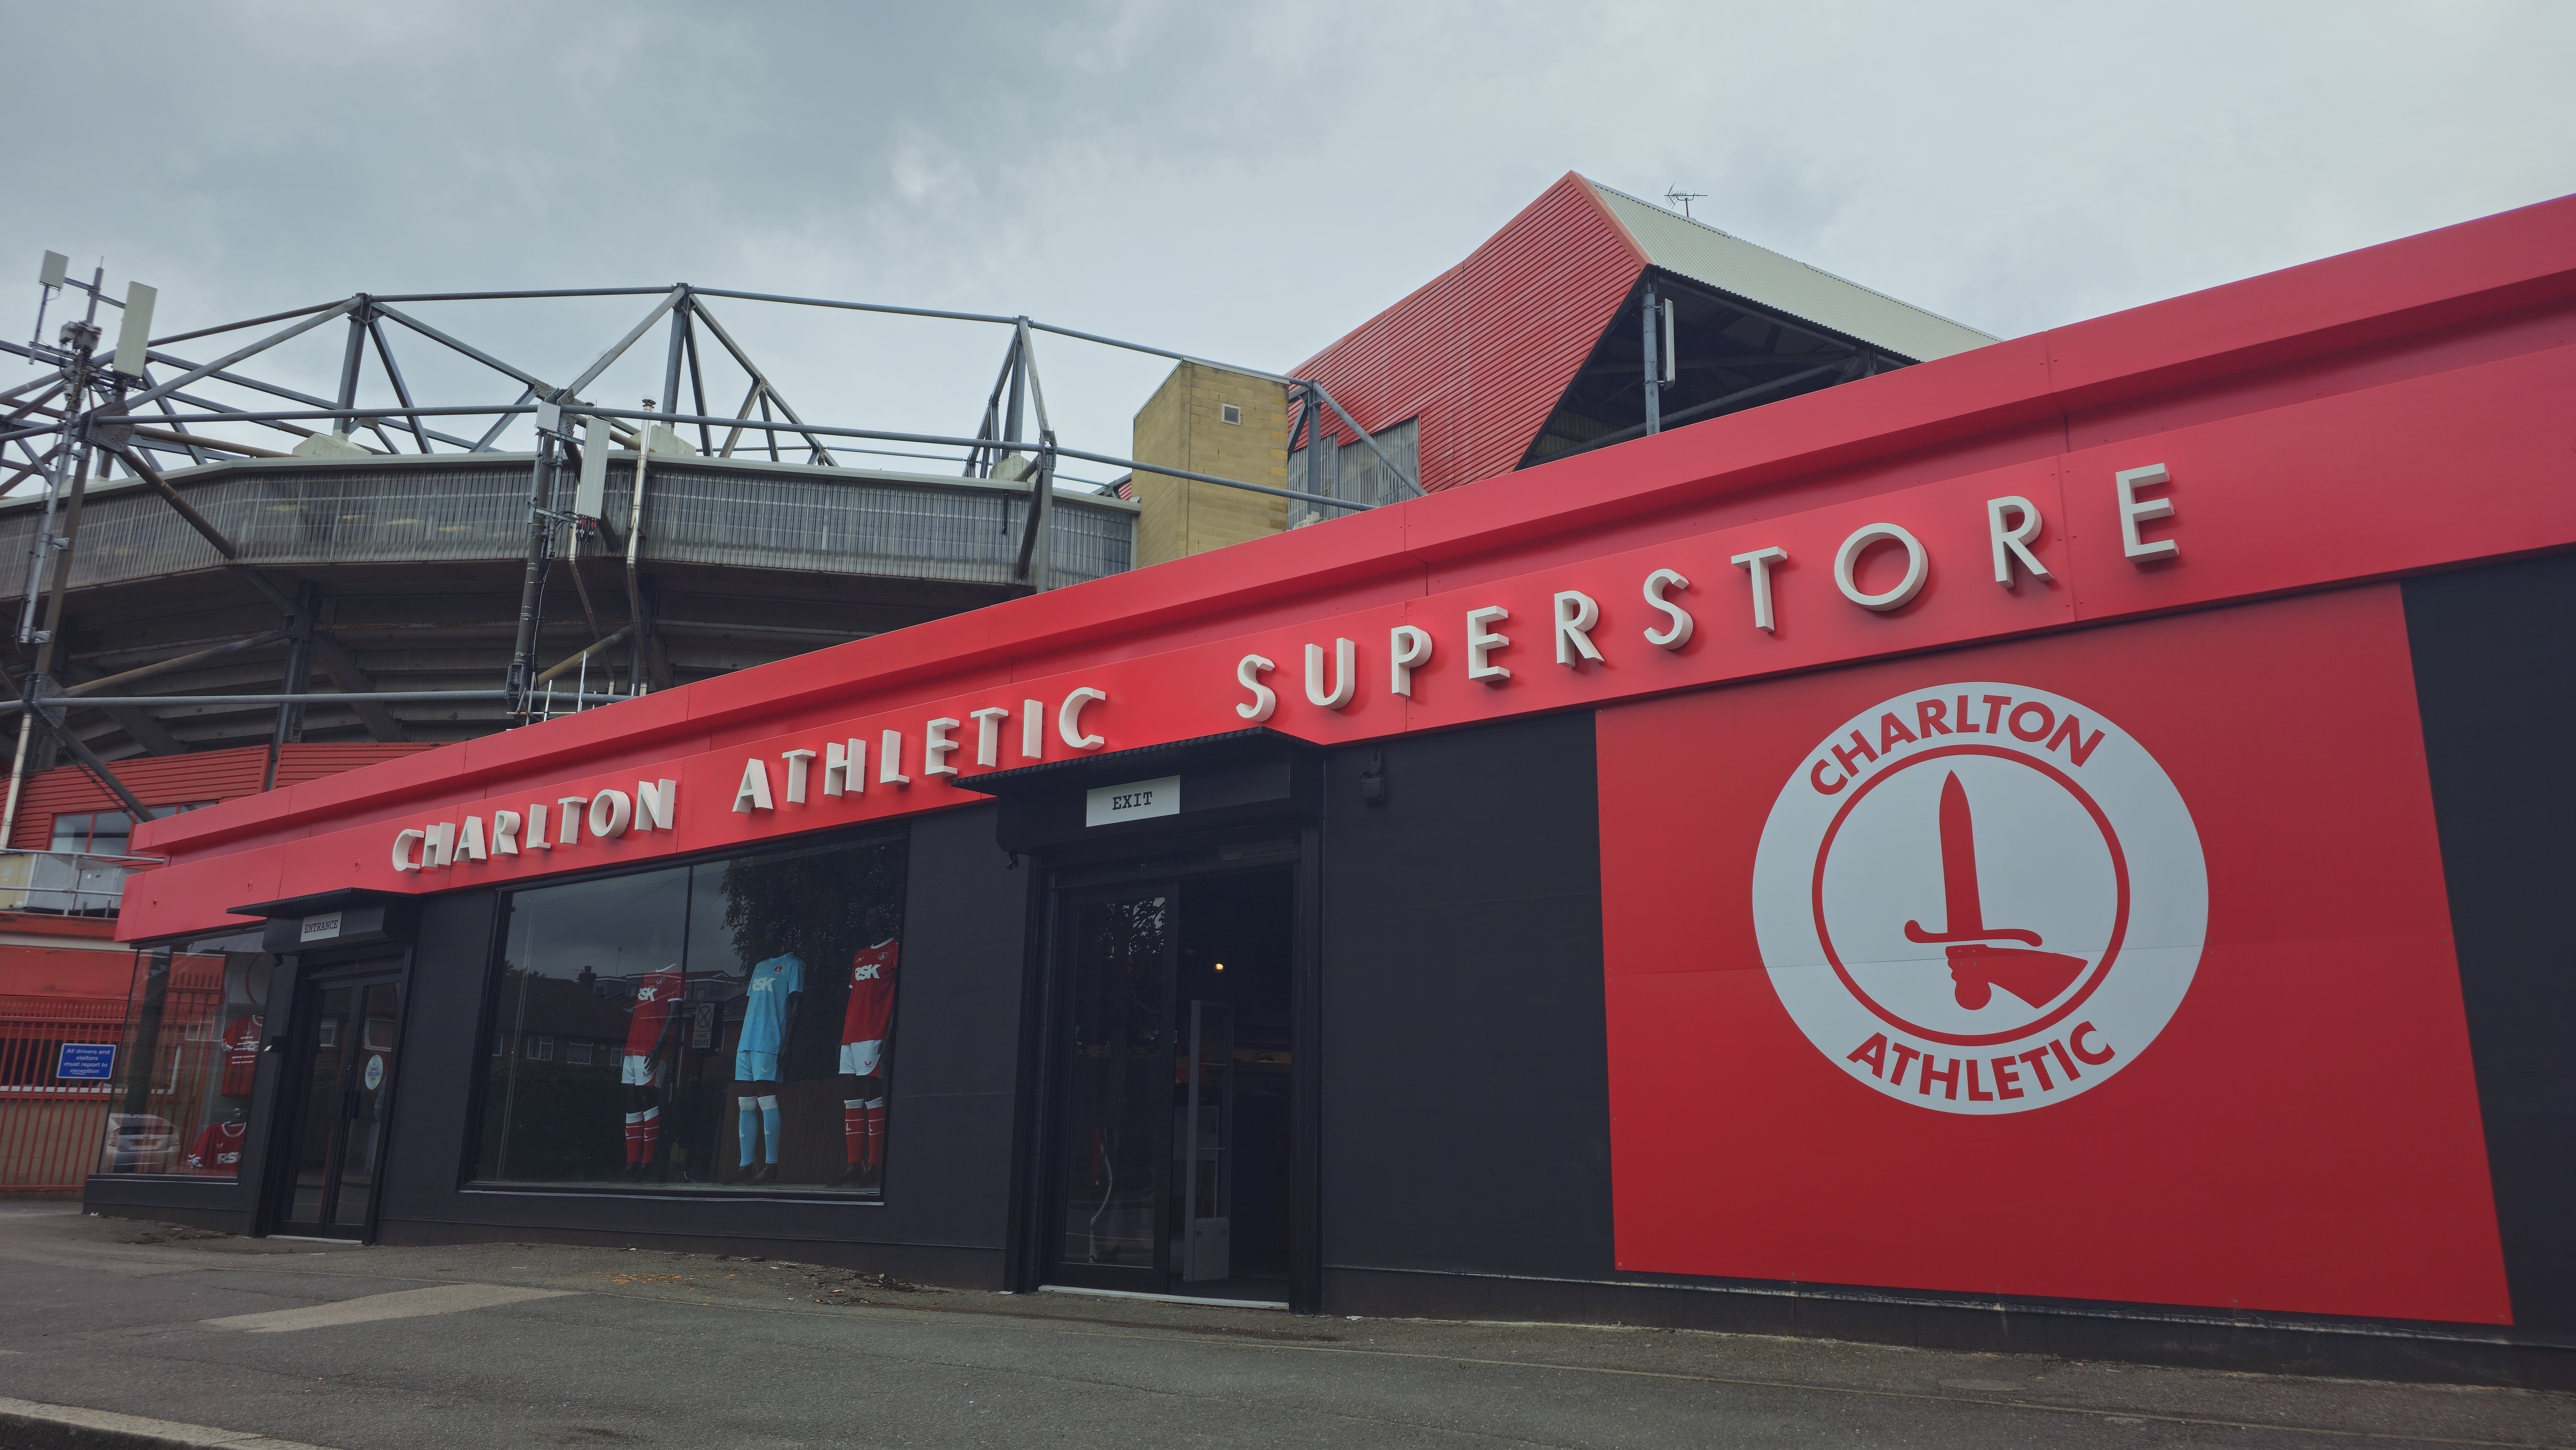 The Charlton Athletic Superstore